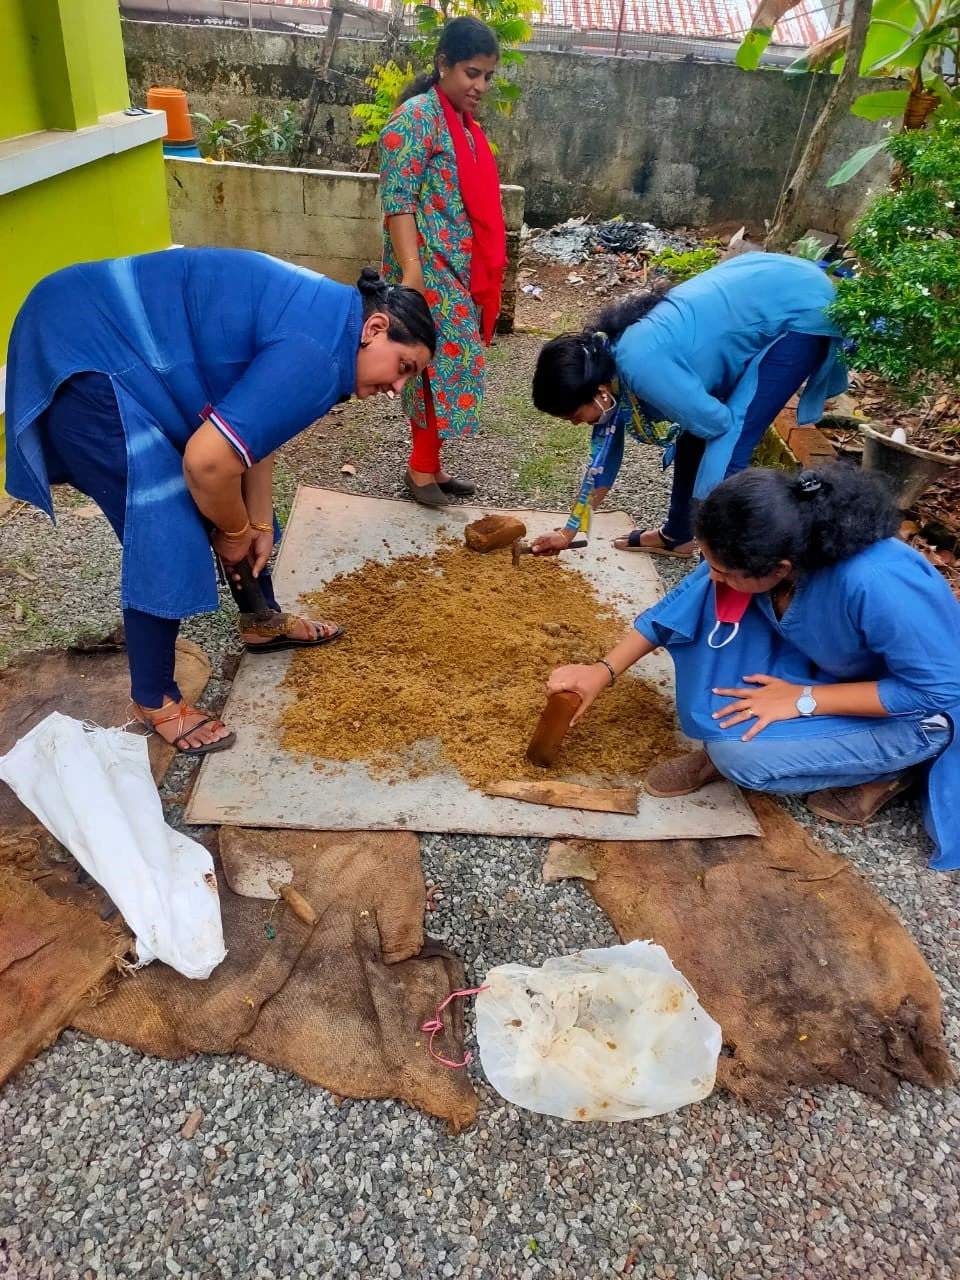 Department of agriculture mixing jaggery powder with copper sulphate for making the snail trap. Photo Credit: World Bank